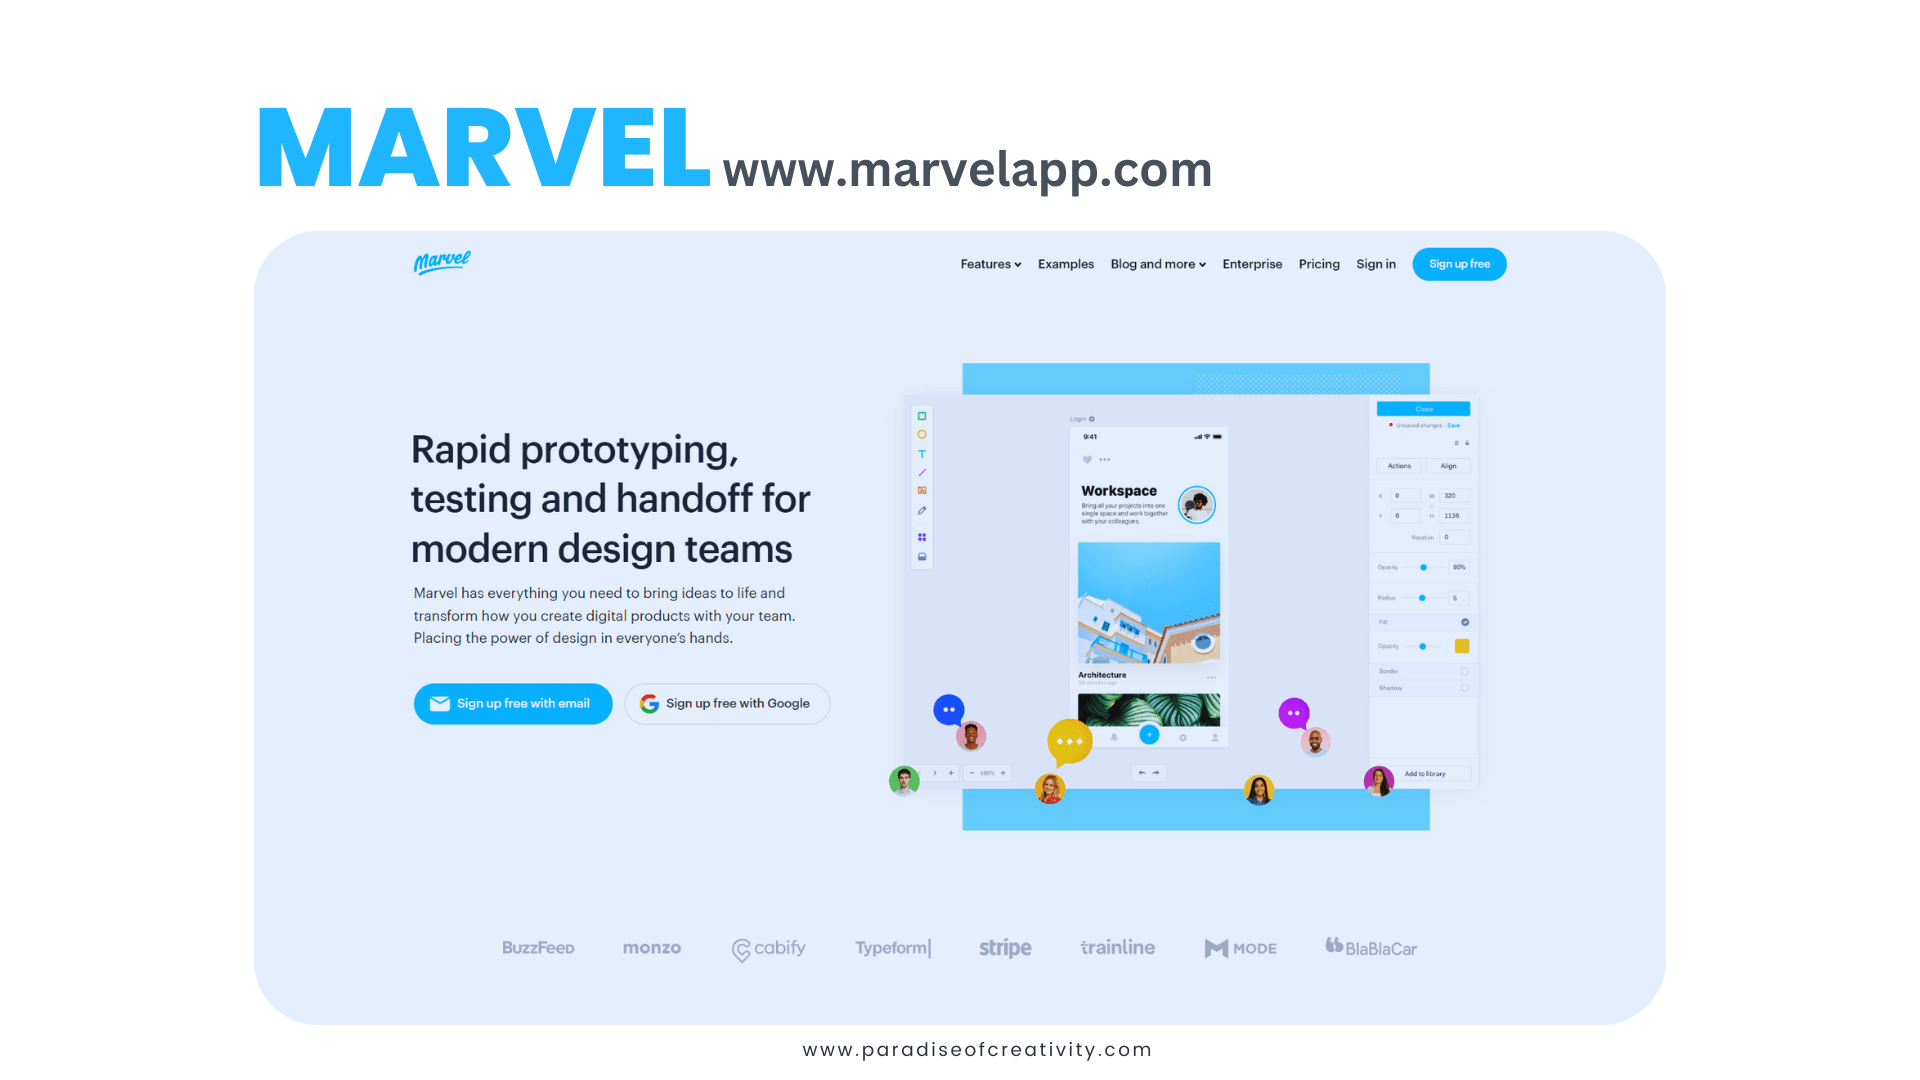 Rapid prototyping, testing and handoff for modern design teams - Marvel has everything you need to bring ideas to life and transform how you create digital products with your team. Placing the power of design in everyone’s hands.